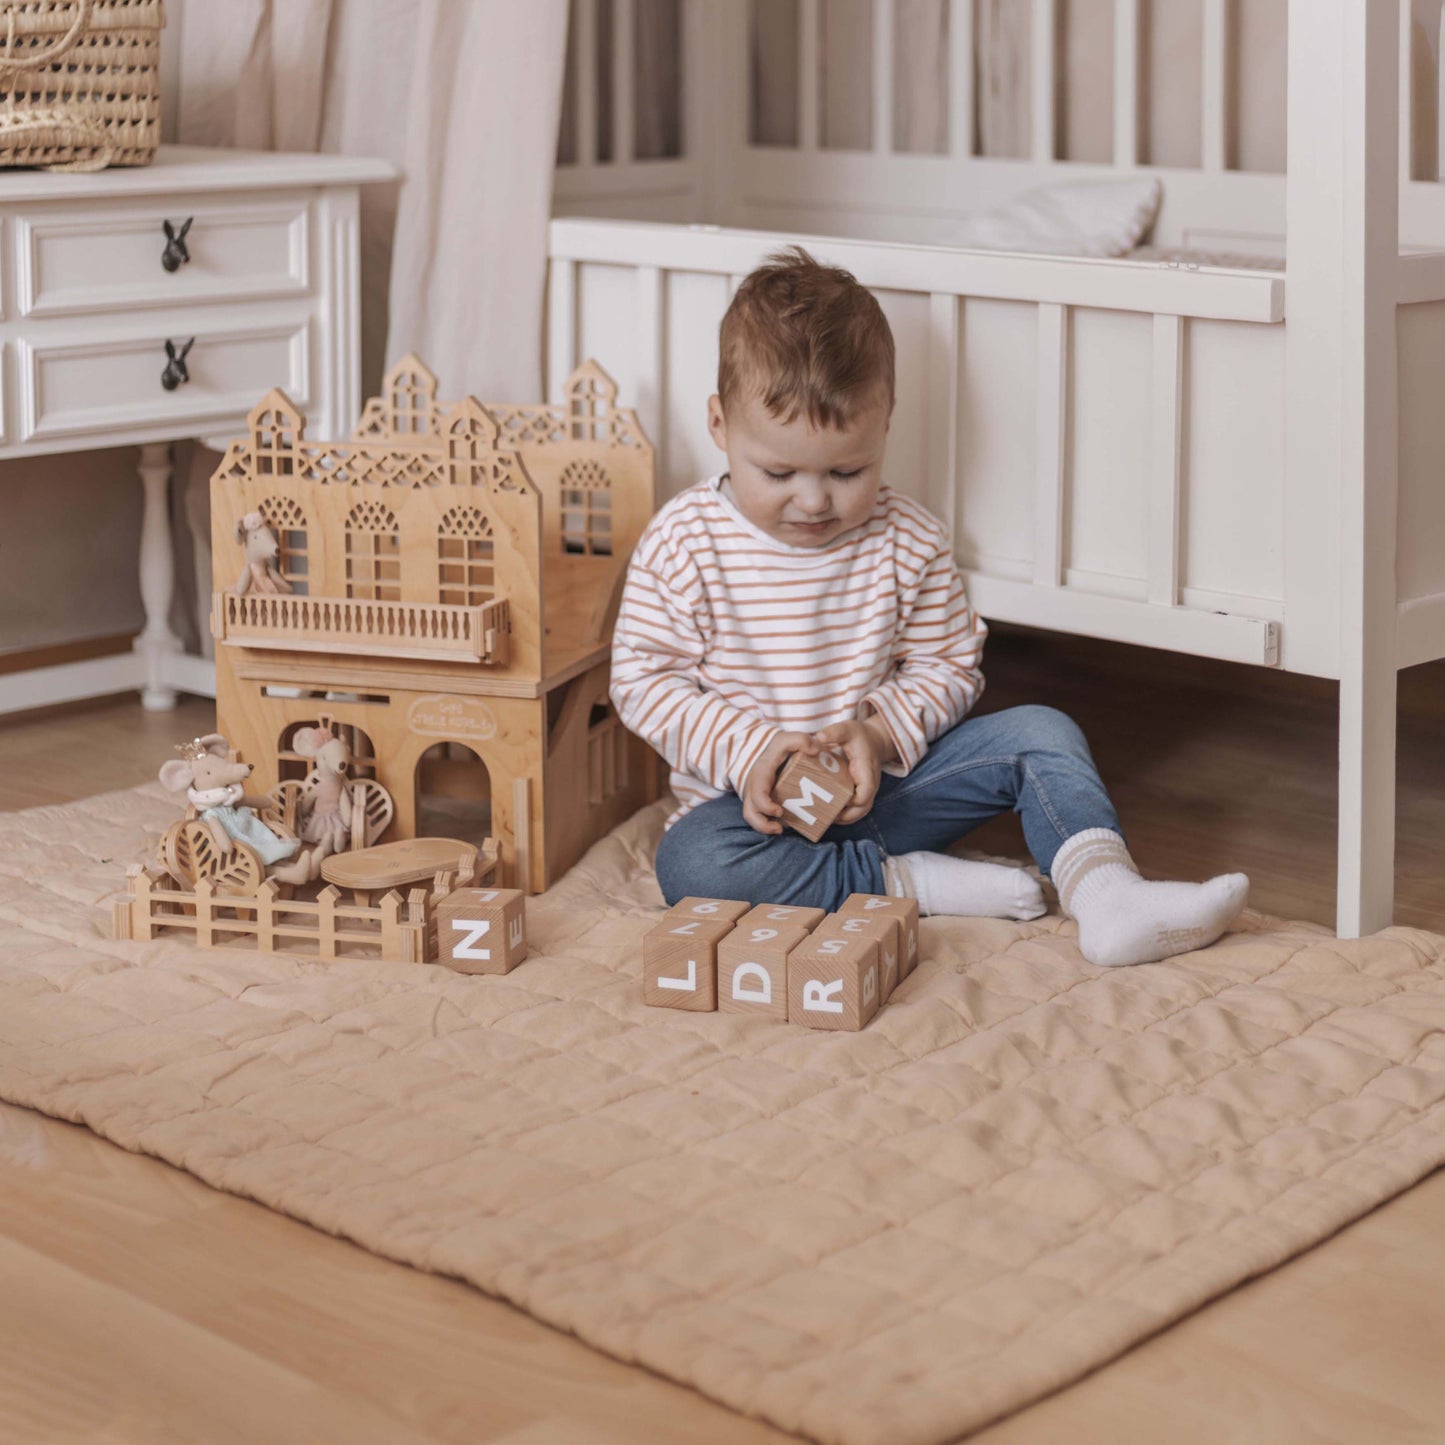 Anna can be used as a play mat so that your child can have fun comfortably in his room or outdoors.